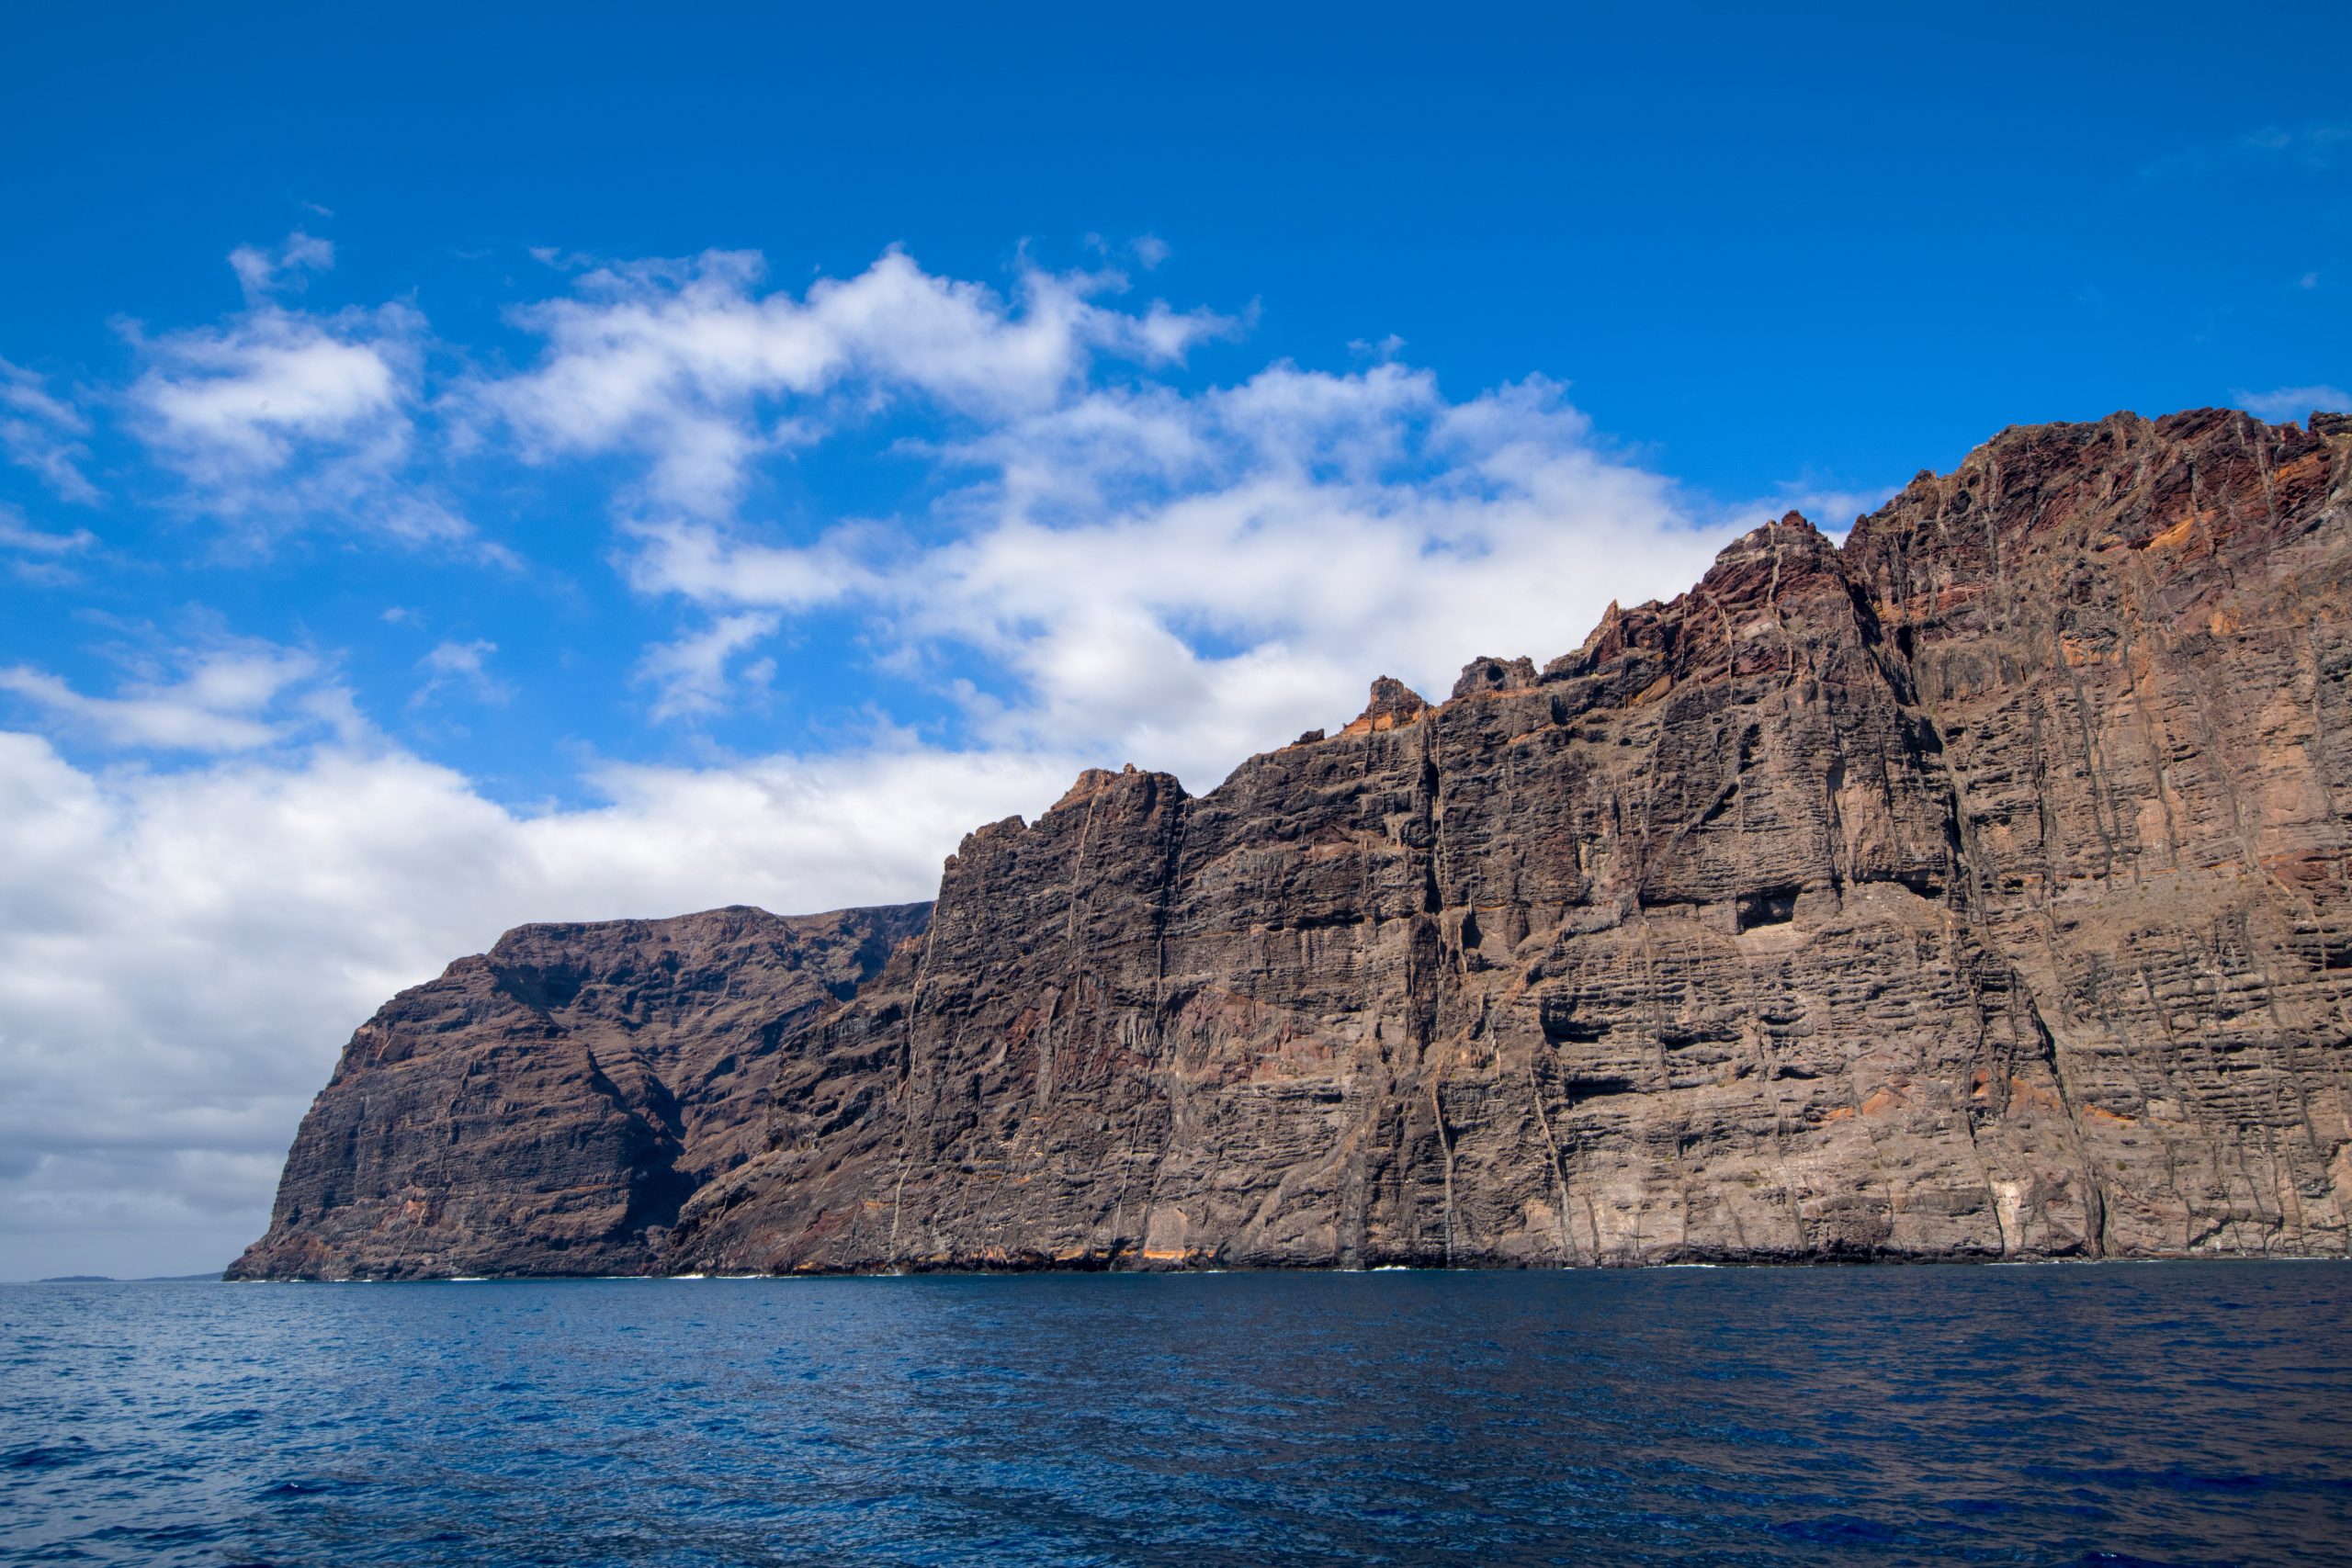 Los Gigantes from the sea